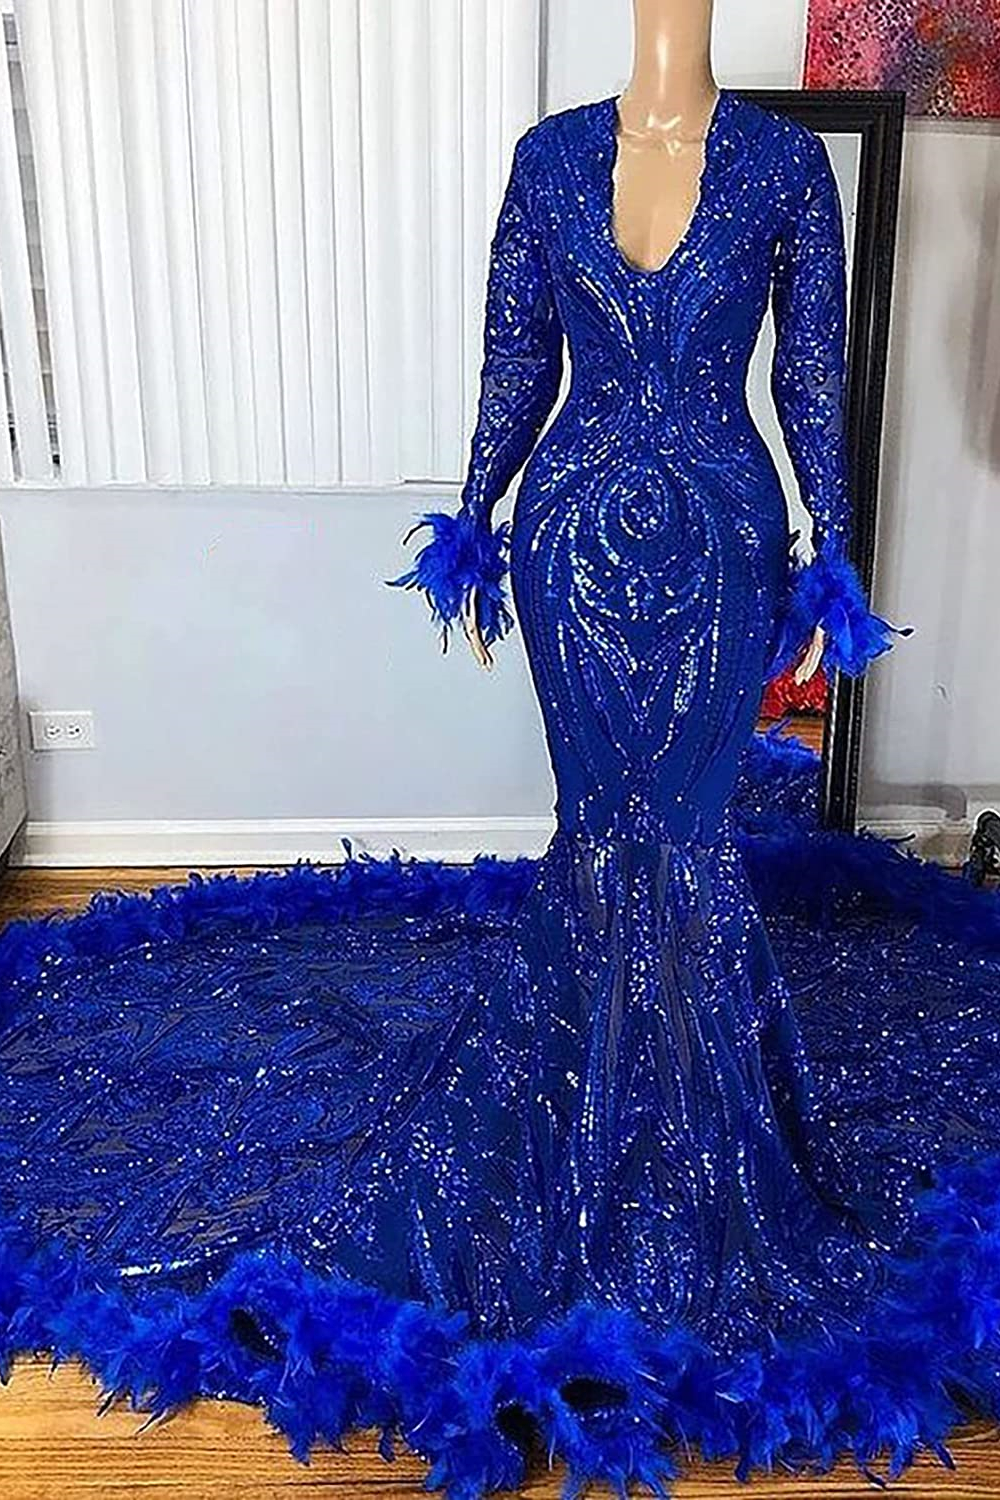 Budget Royal Blue Long Sleeves Evening Gowns Mermaid Sequins With Feather - lulusllly